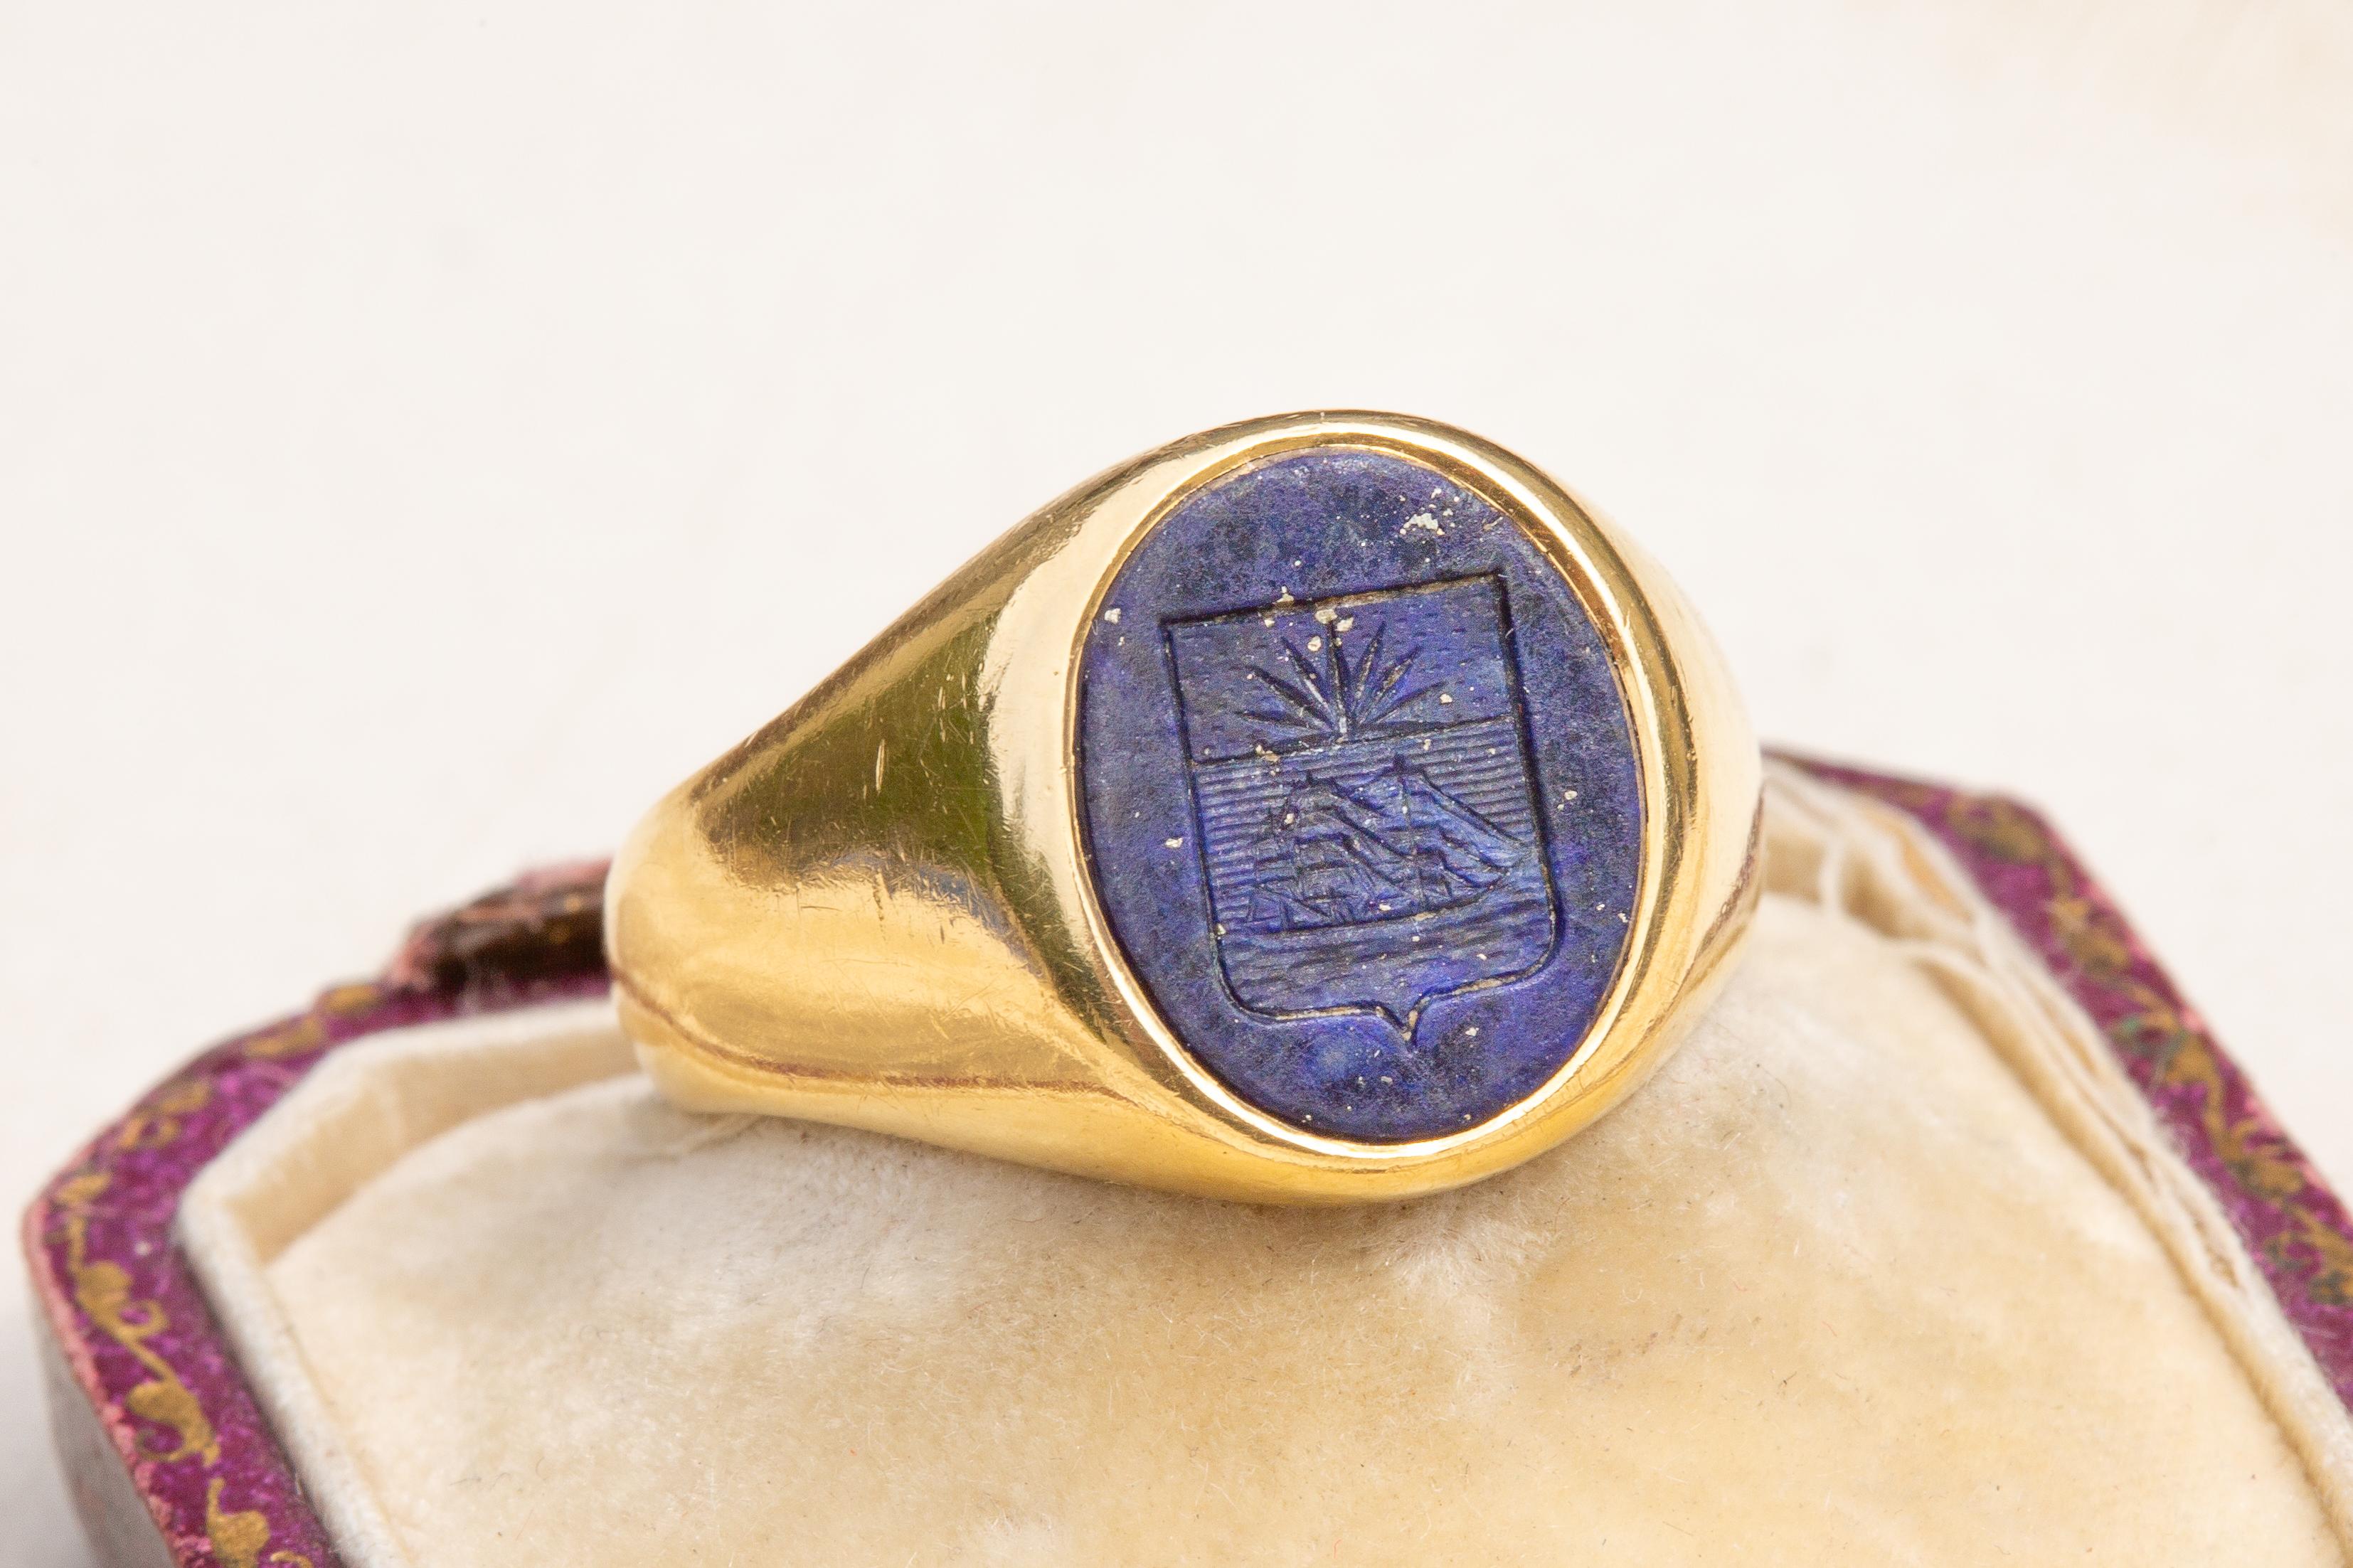 This fantastic gold signet ring dates to the early 20th century, circa 1910 and was made in Paris. A vibrant lapis lazuli is engraved with a French heraldic family coat of arms. 

The carved lapis lazuli displays a gorgeous blue hues with evenly